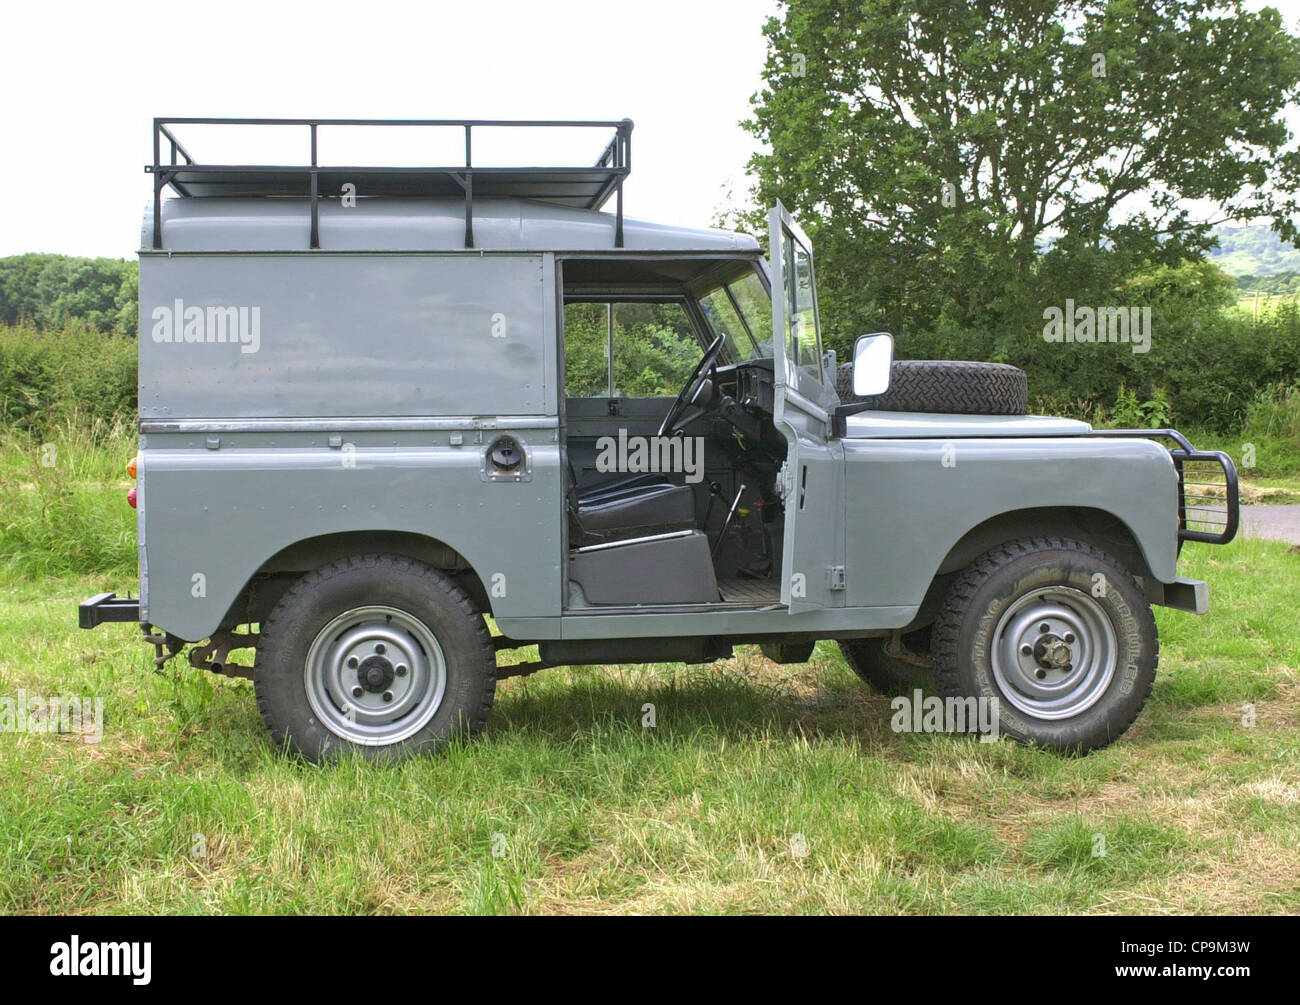 Landrover Land Rover This is the Series 3 model made in 1971 it is the 29th off the production line. Stock Photo